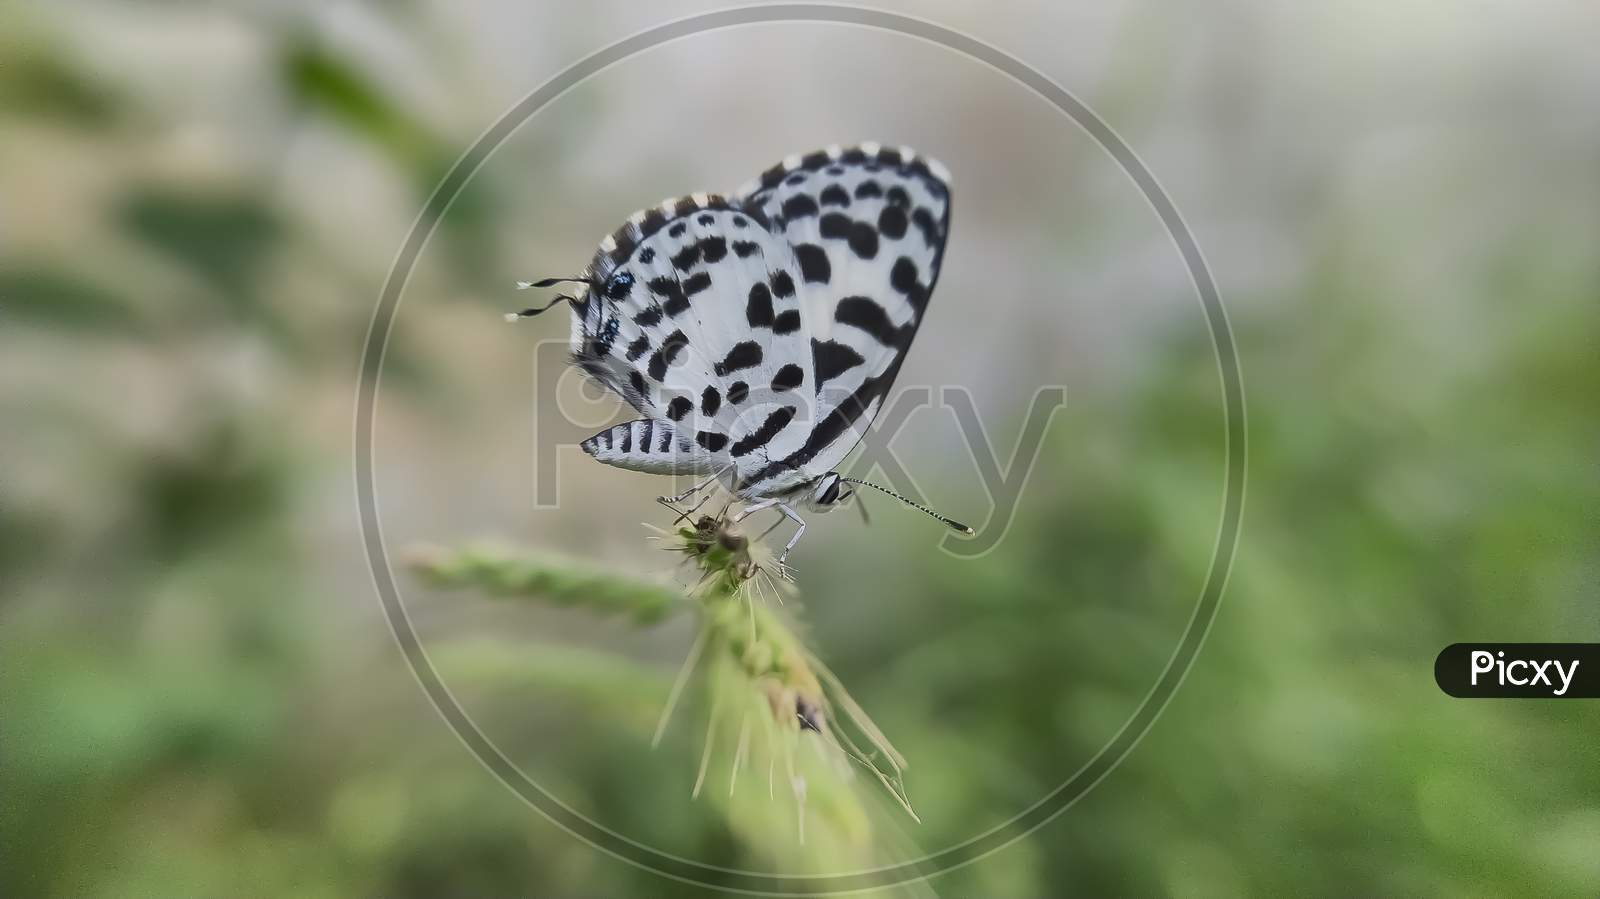 Zizula hylax butterfly on leaf  the Gaika blue or tiny grass blue is a species of blue butterfly. sun and sunlight